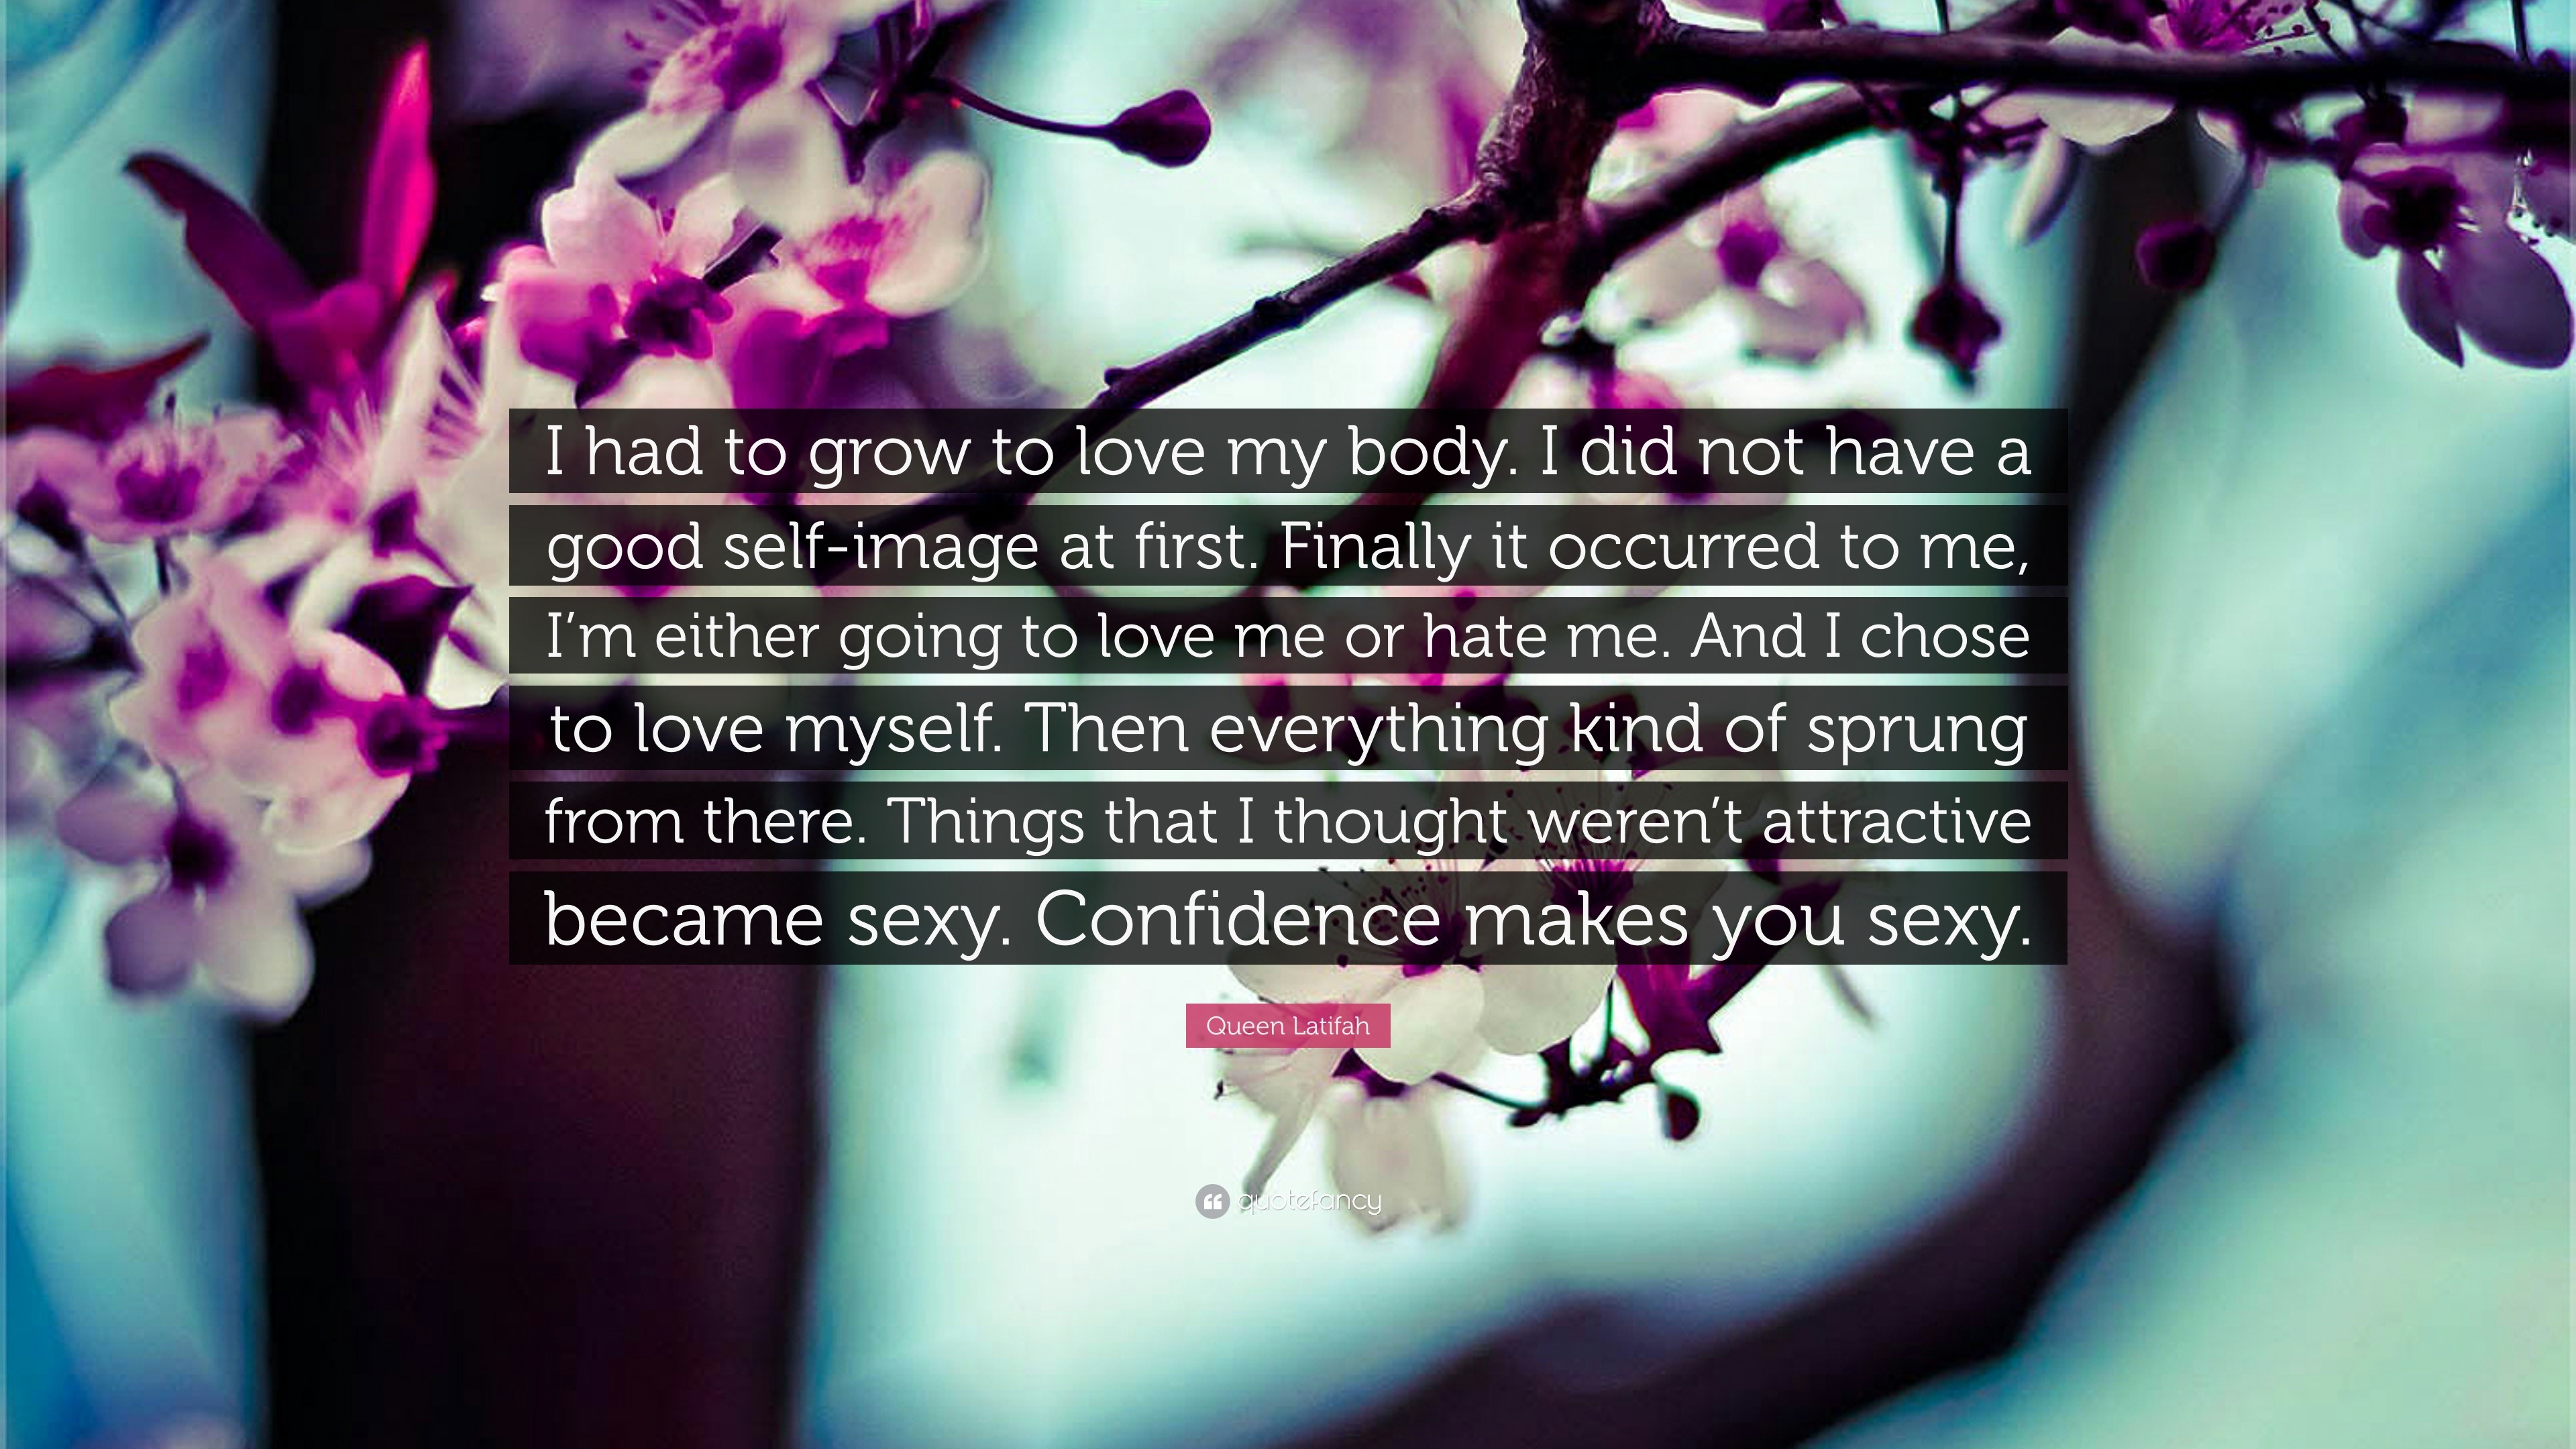 https://quotefancy.com/media/wallpaper/3840x2160/386294-Queen-Latifah-Quote-I-had-to-grow-to-love-my-body-I-did-not-have-a.jpg